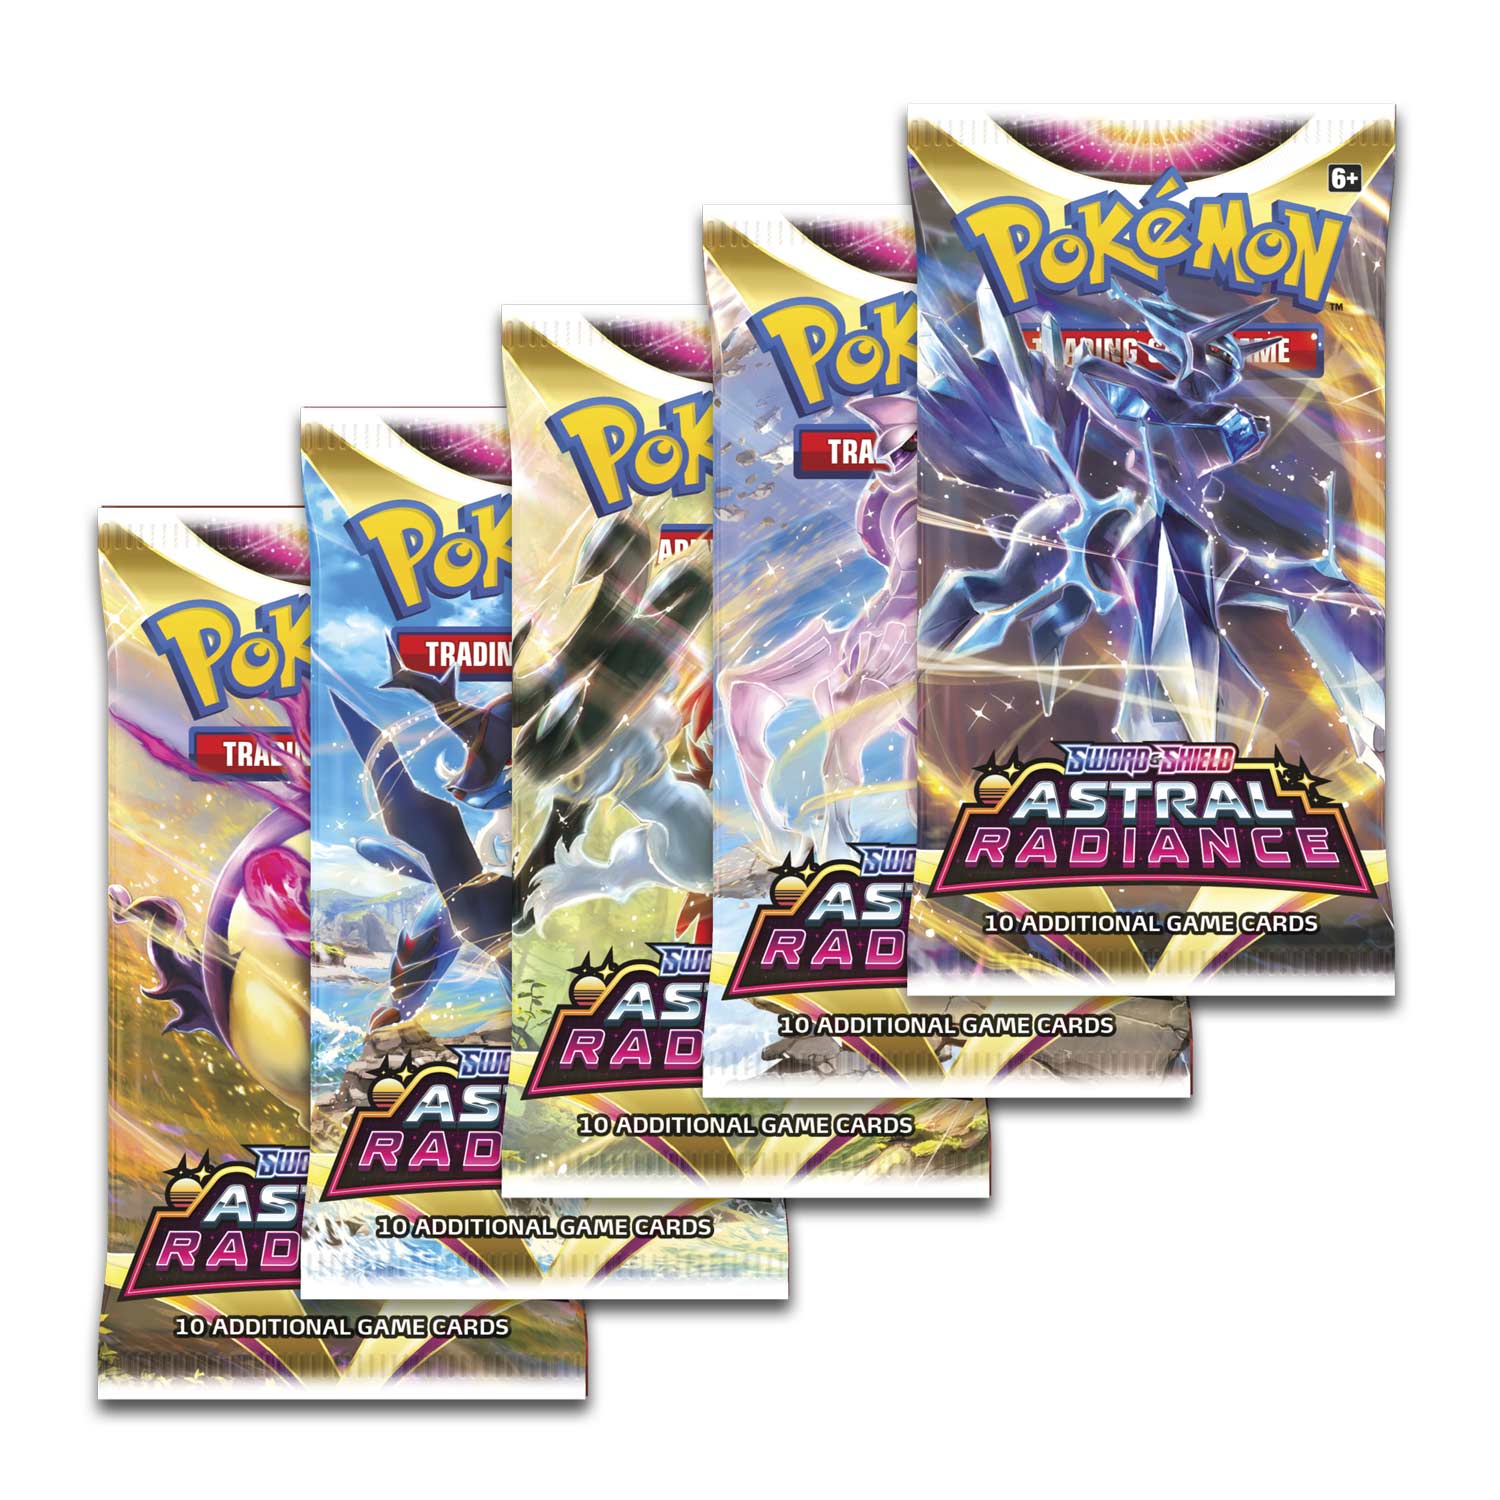 36-Pack Pokemon TCG: Sword & Shield Astral Radiance Booster Box $99.80 + Free Shipping